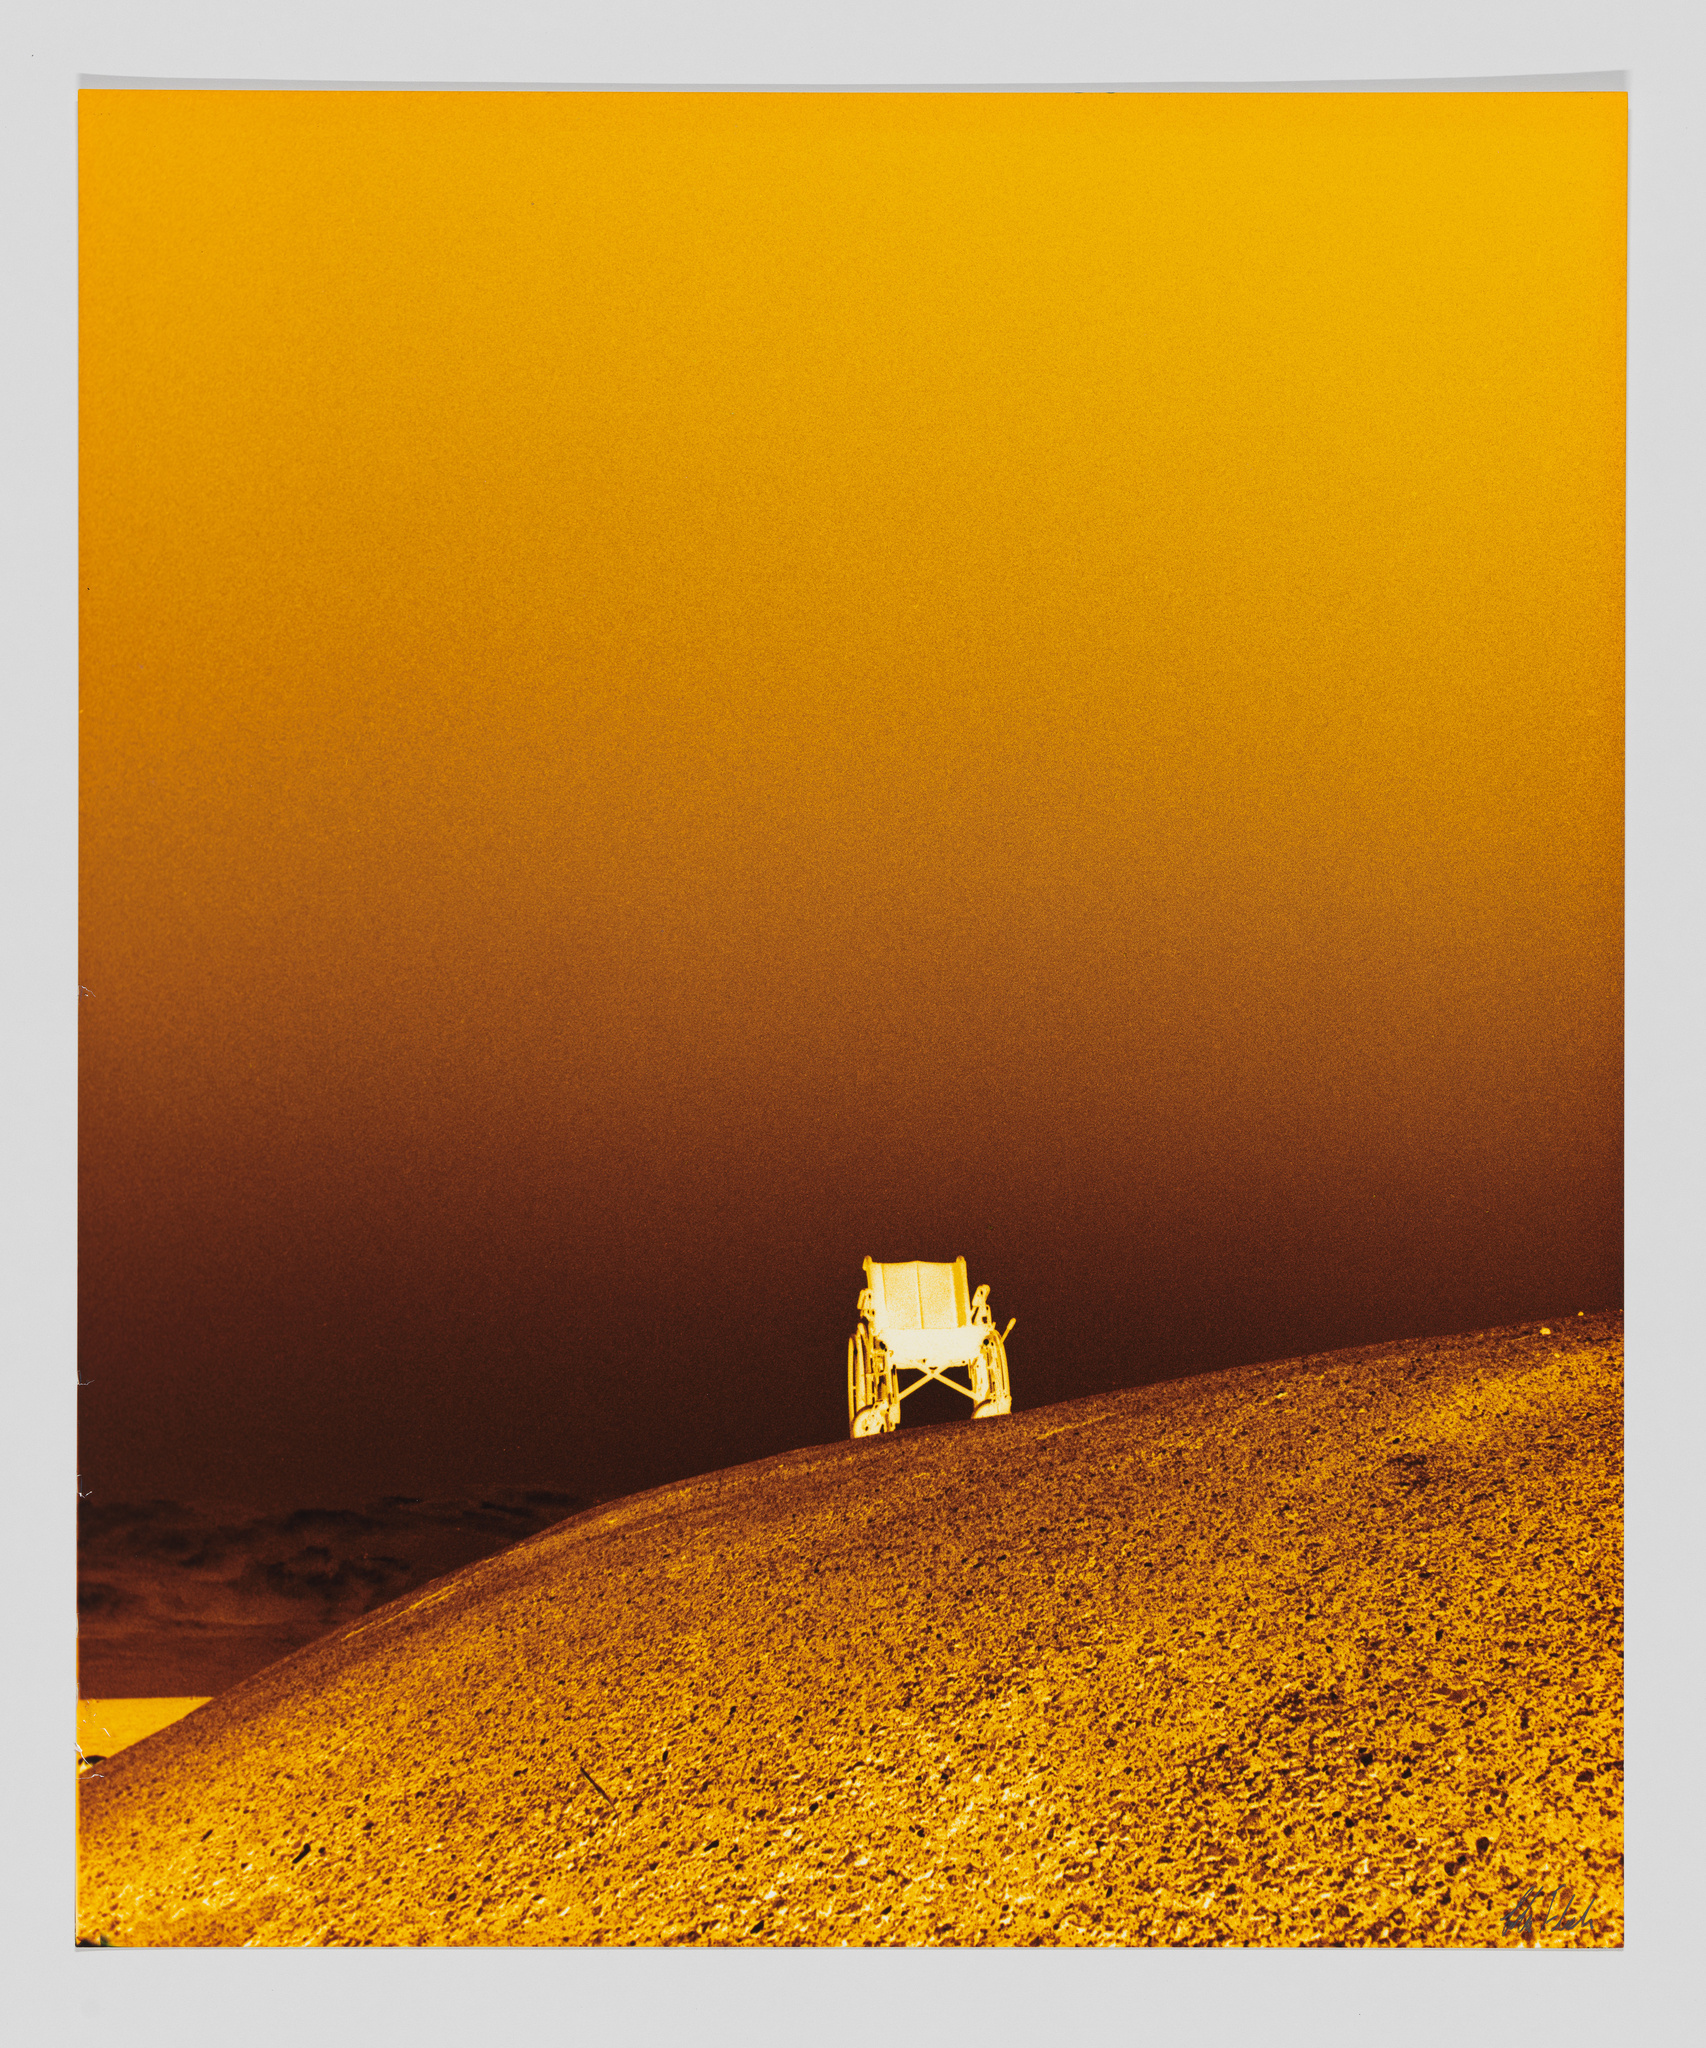 A photo of a wheelchair on a hill. The colors have been inverted and the whole photo is in shades of orange.